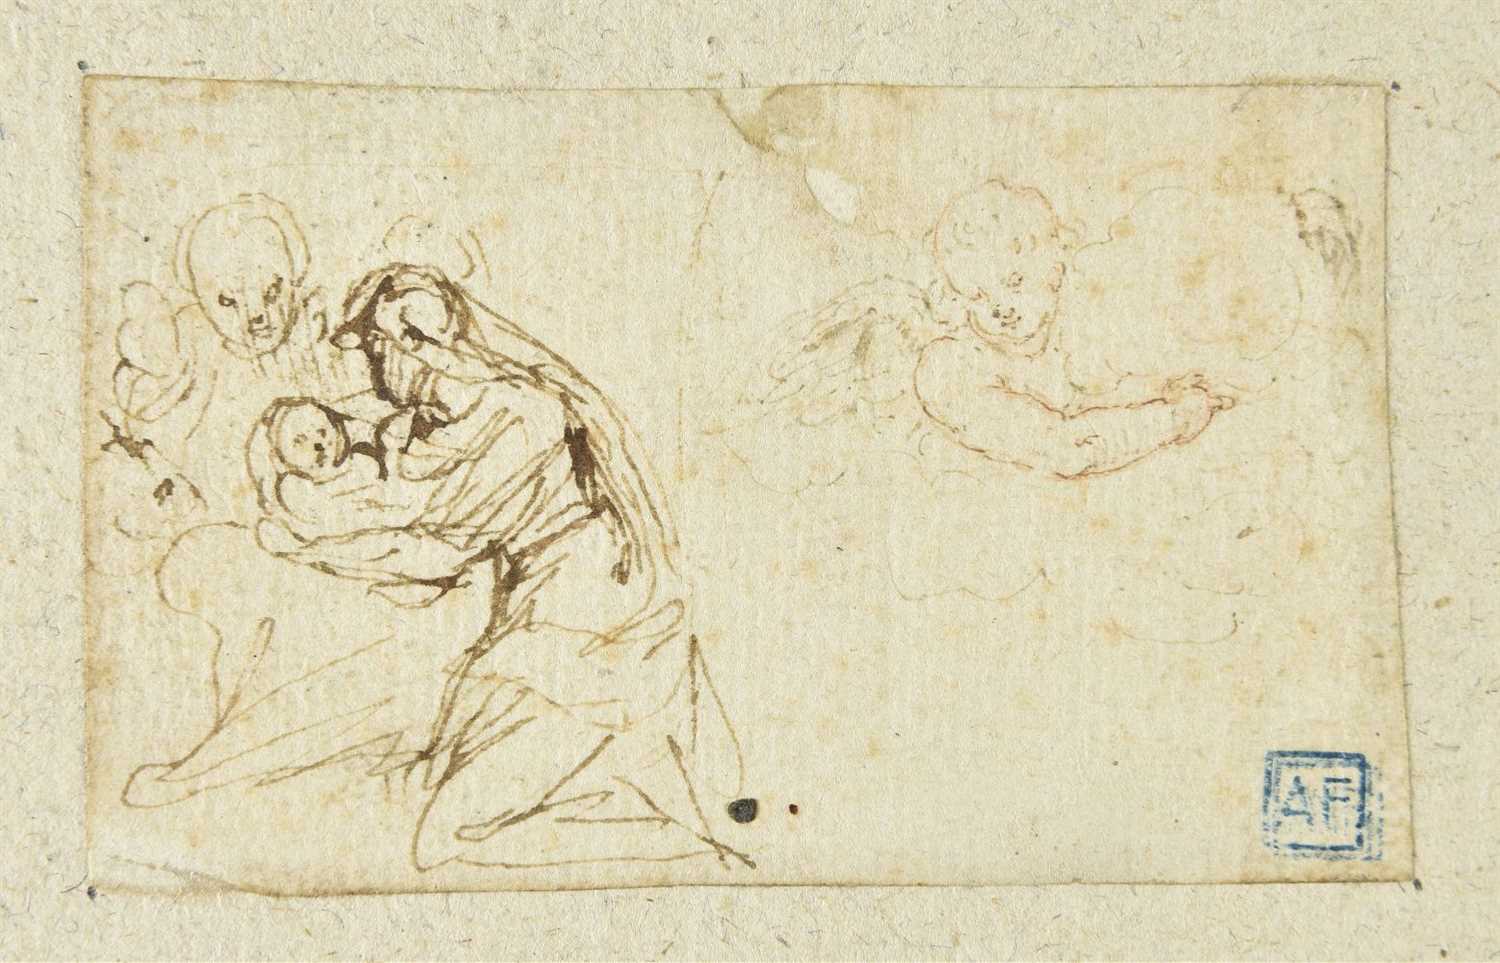 Lot 226 - Attributed to Luca Cambiaso (1527-1585). Sketch of the Holy Family, and a Putto